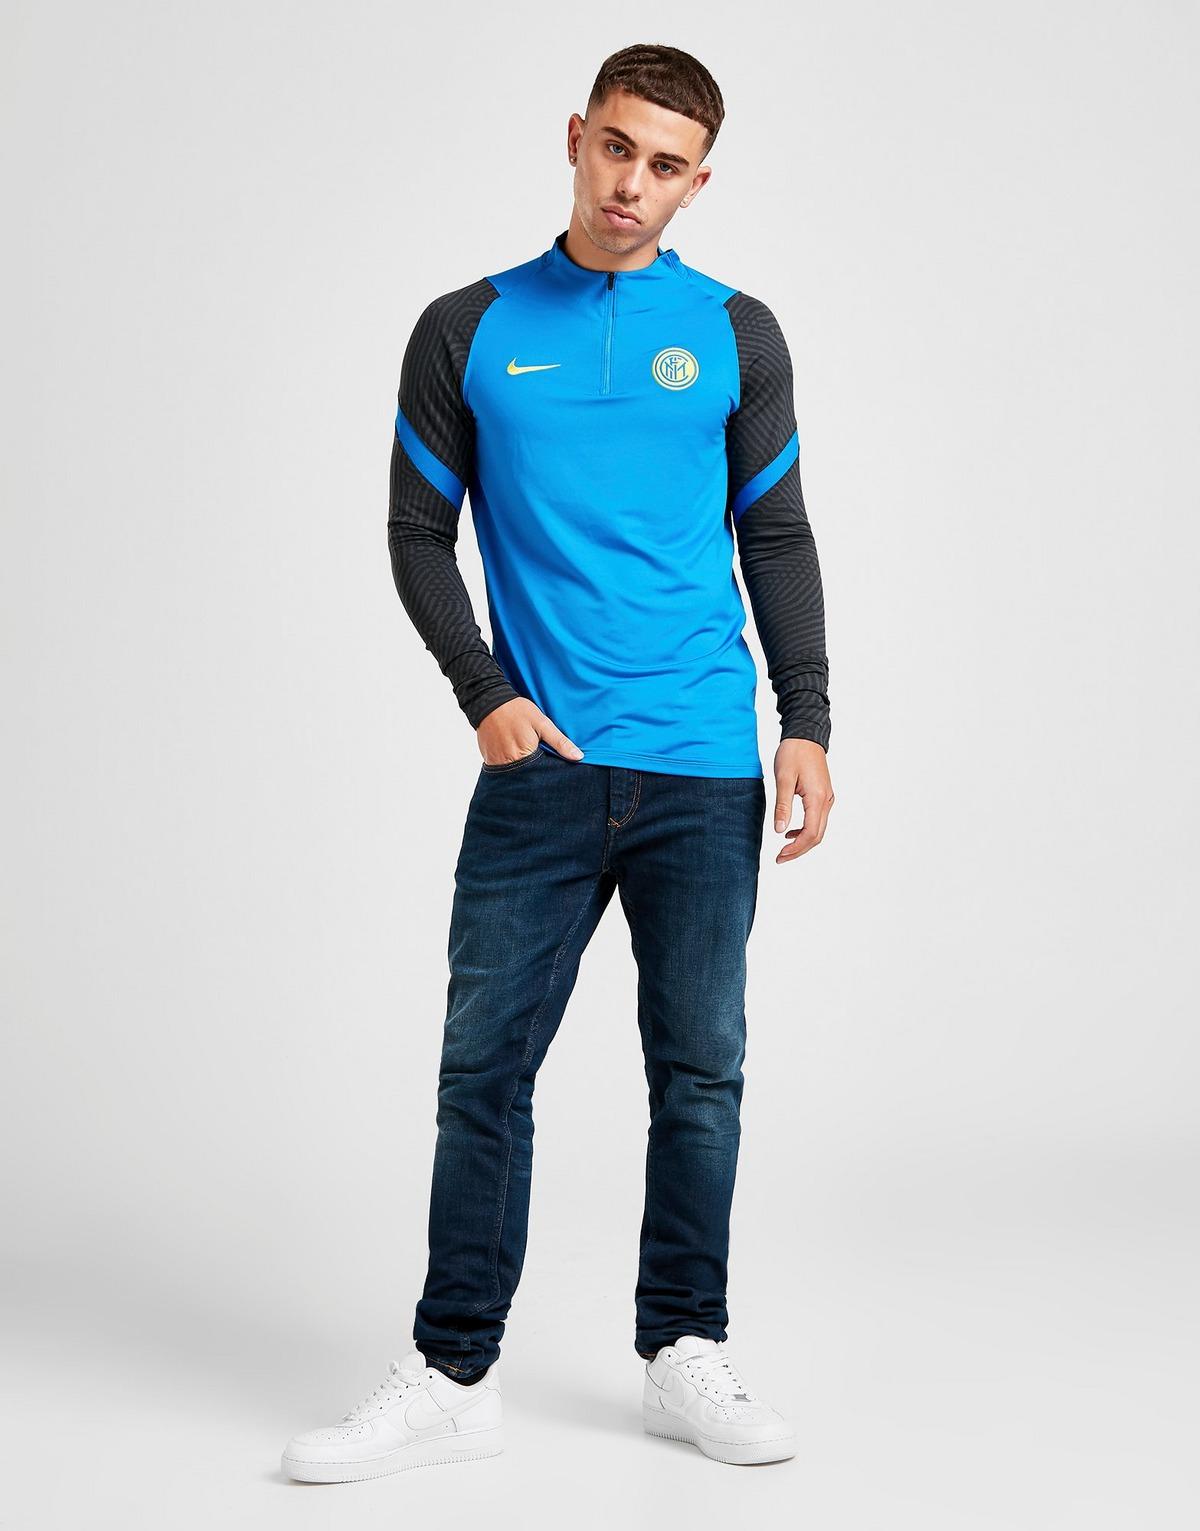 Nike Synthetic Inter Milan Strike Drill Top in Blue for Men - Lyst